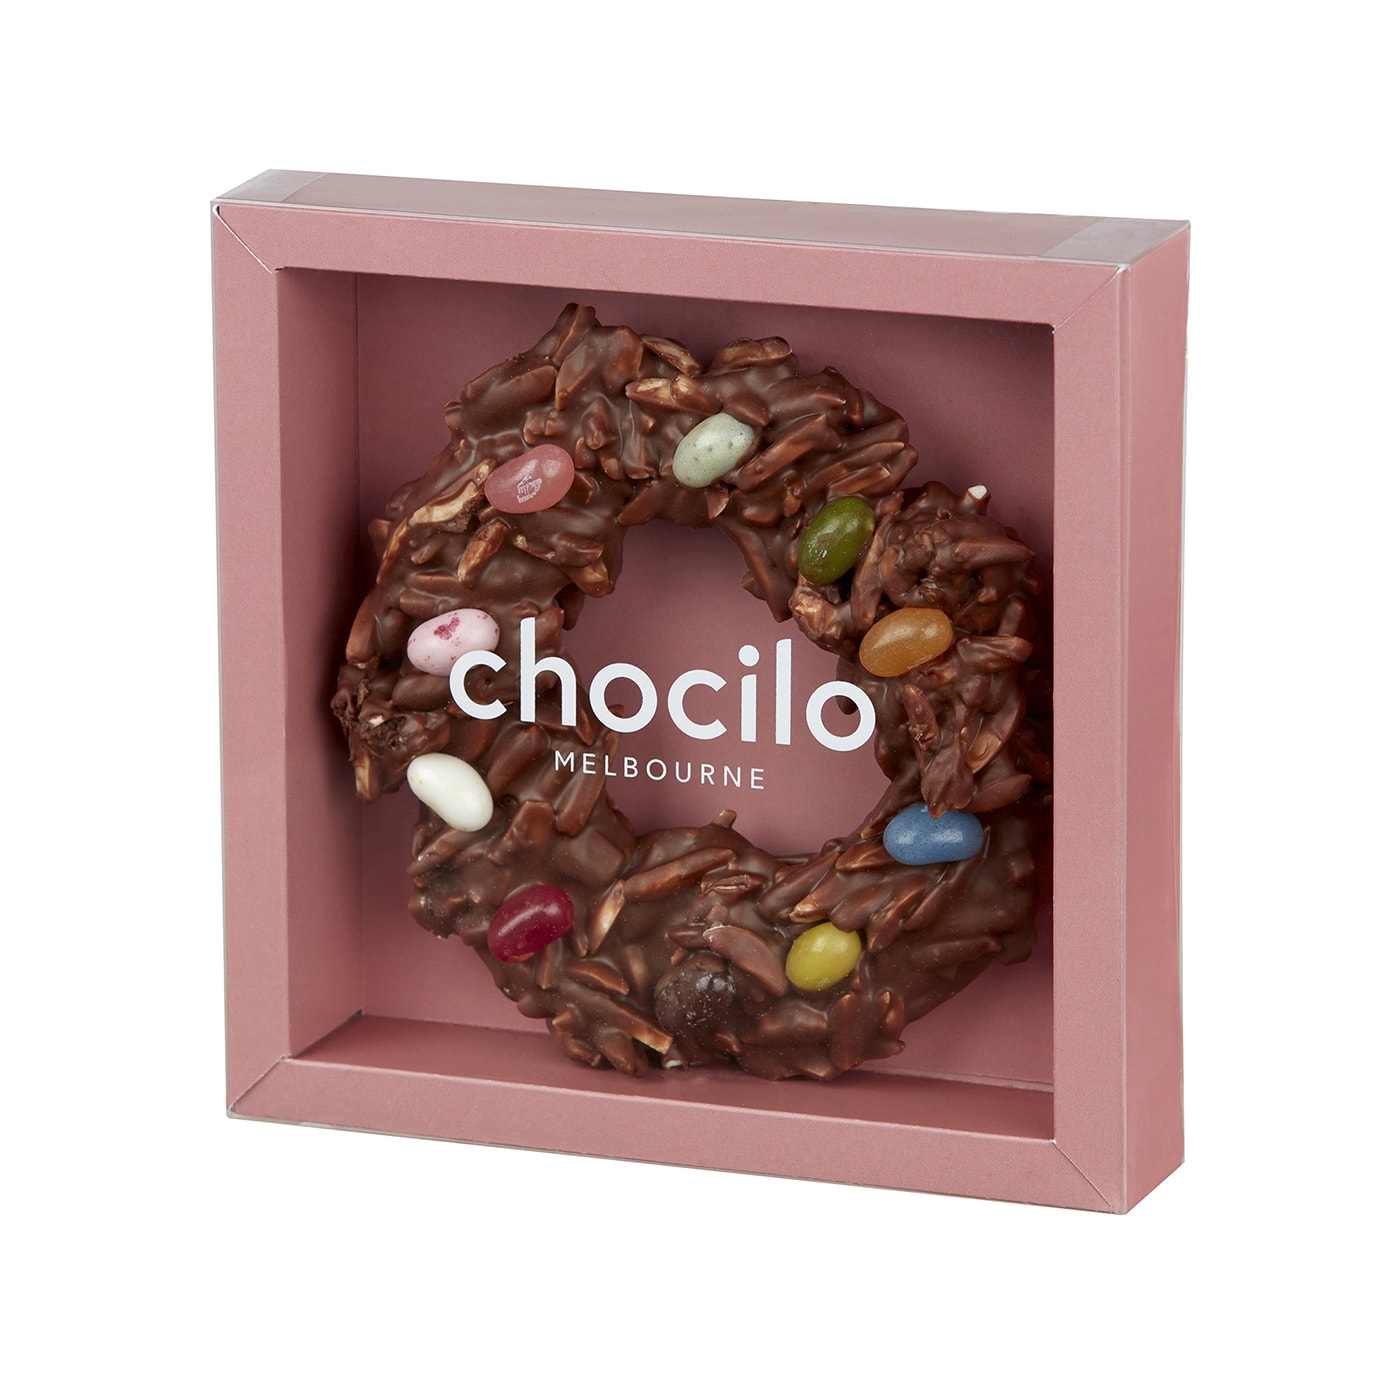 Chocilo Melbourne 100g Christmas Almond Wreath in Milk Chocolate with Jelly Bellies Gift Box